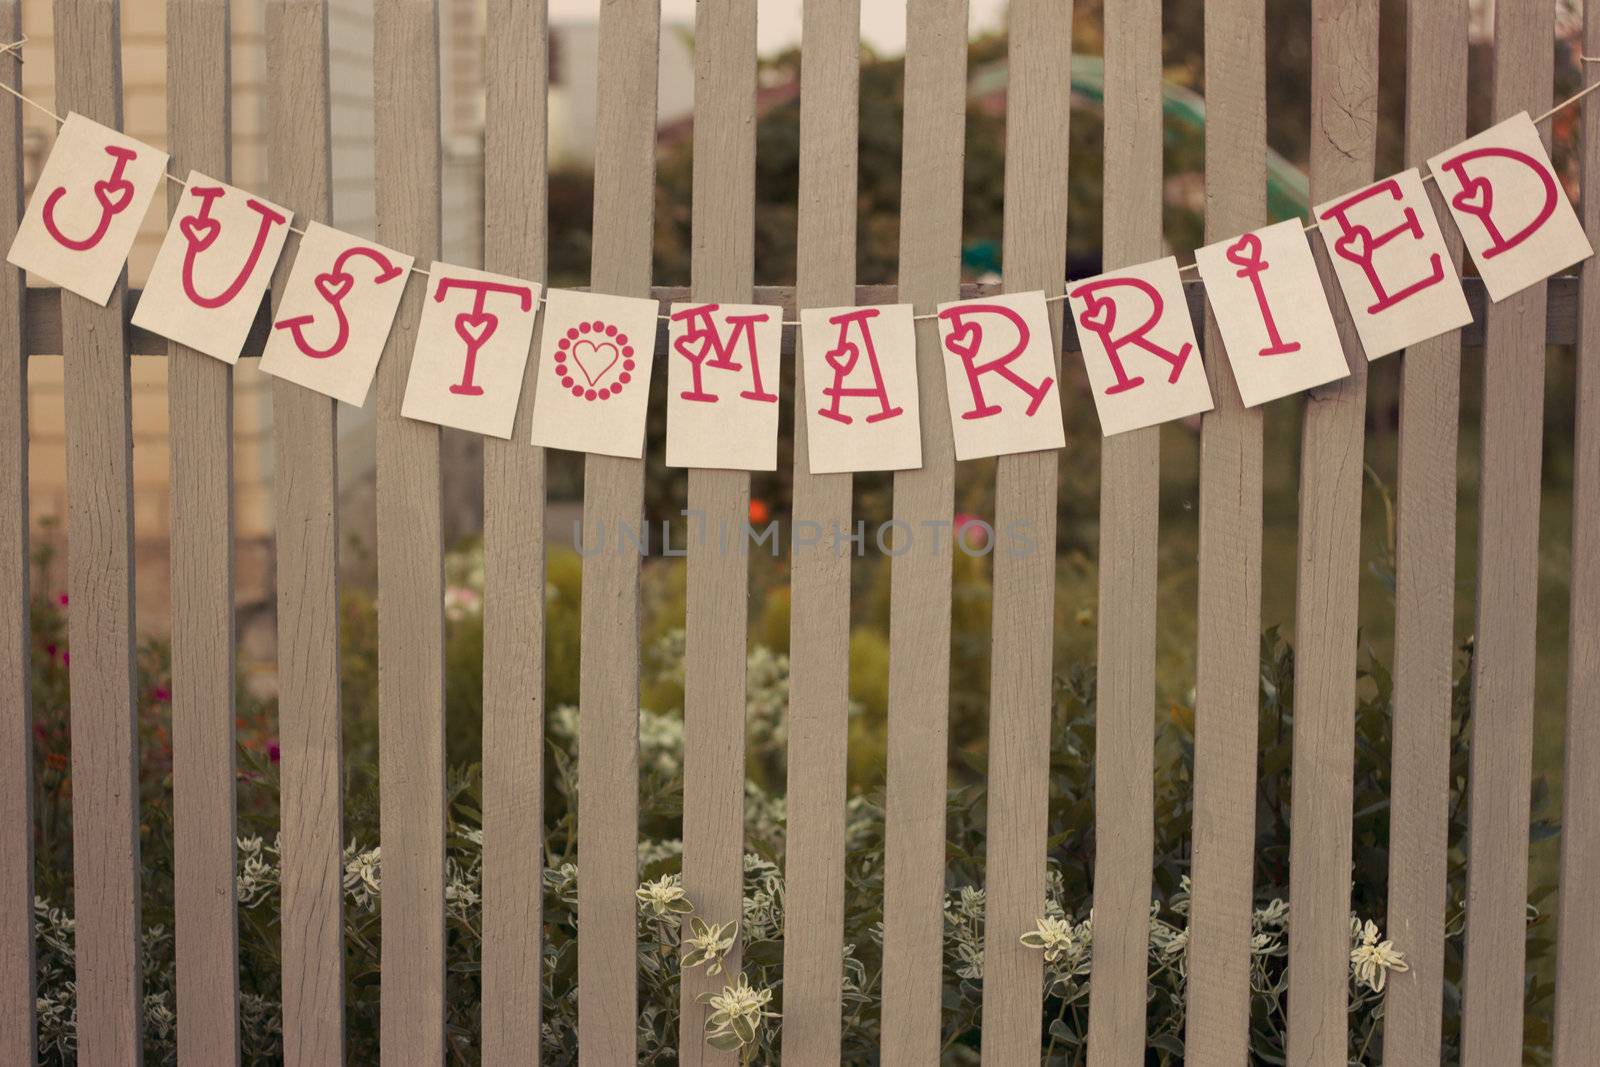 A sign on a white fence "JUST married"